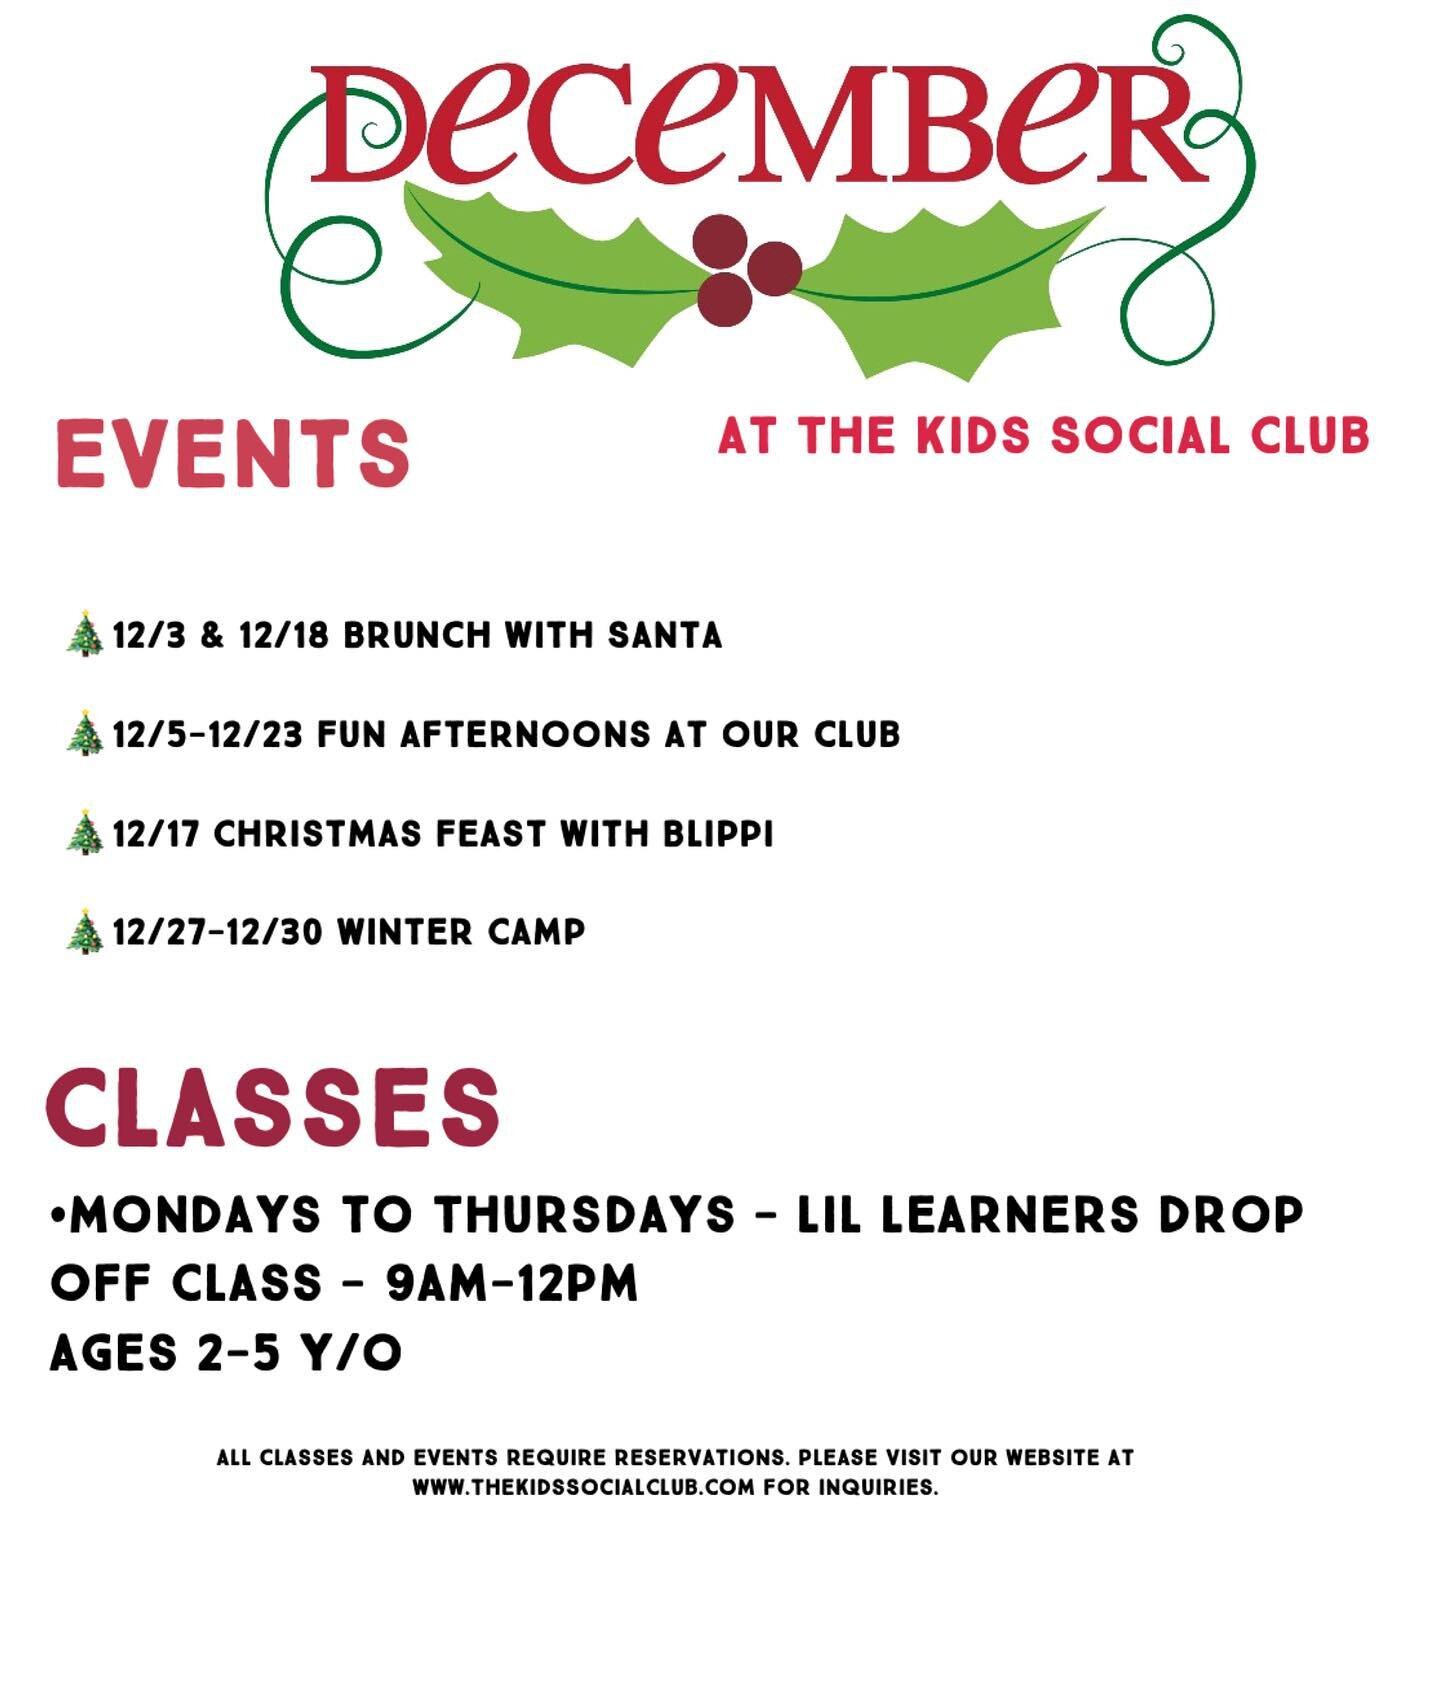 🎄🎅🏻 D E C E M B E R 🎅🏻🎄 at The Kids Social Club

As usual, DM us to reserve your spot for any of these classes and events, details on each post! 

Our space is limited and we ask that you please reserve your spot before attending. 

Socks are r